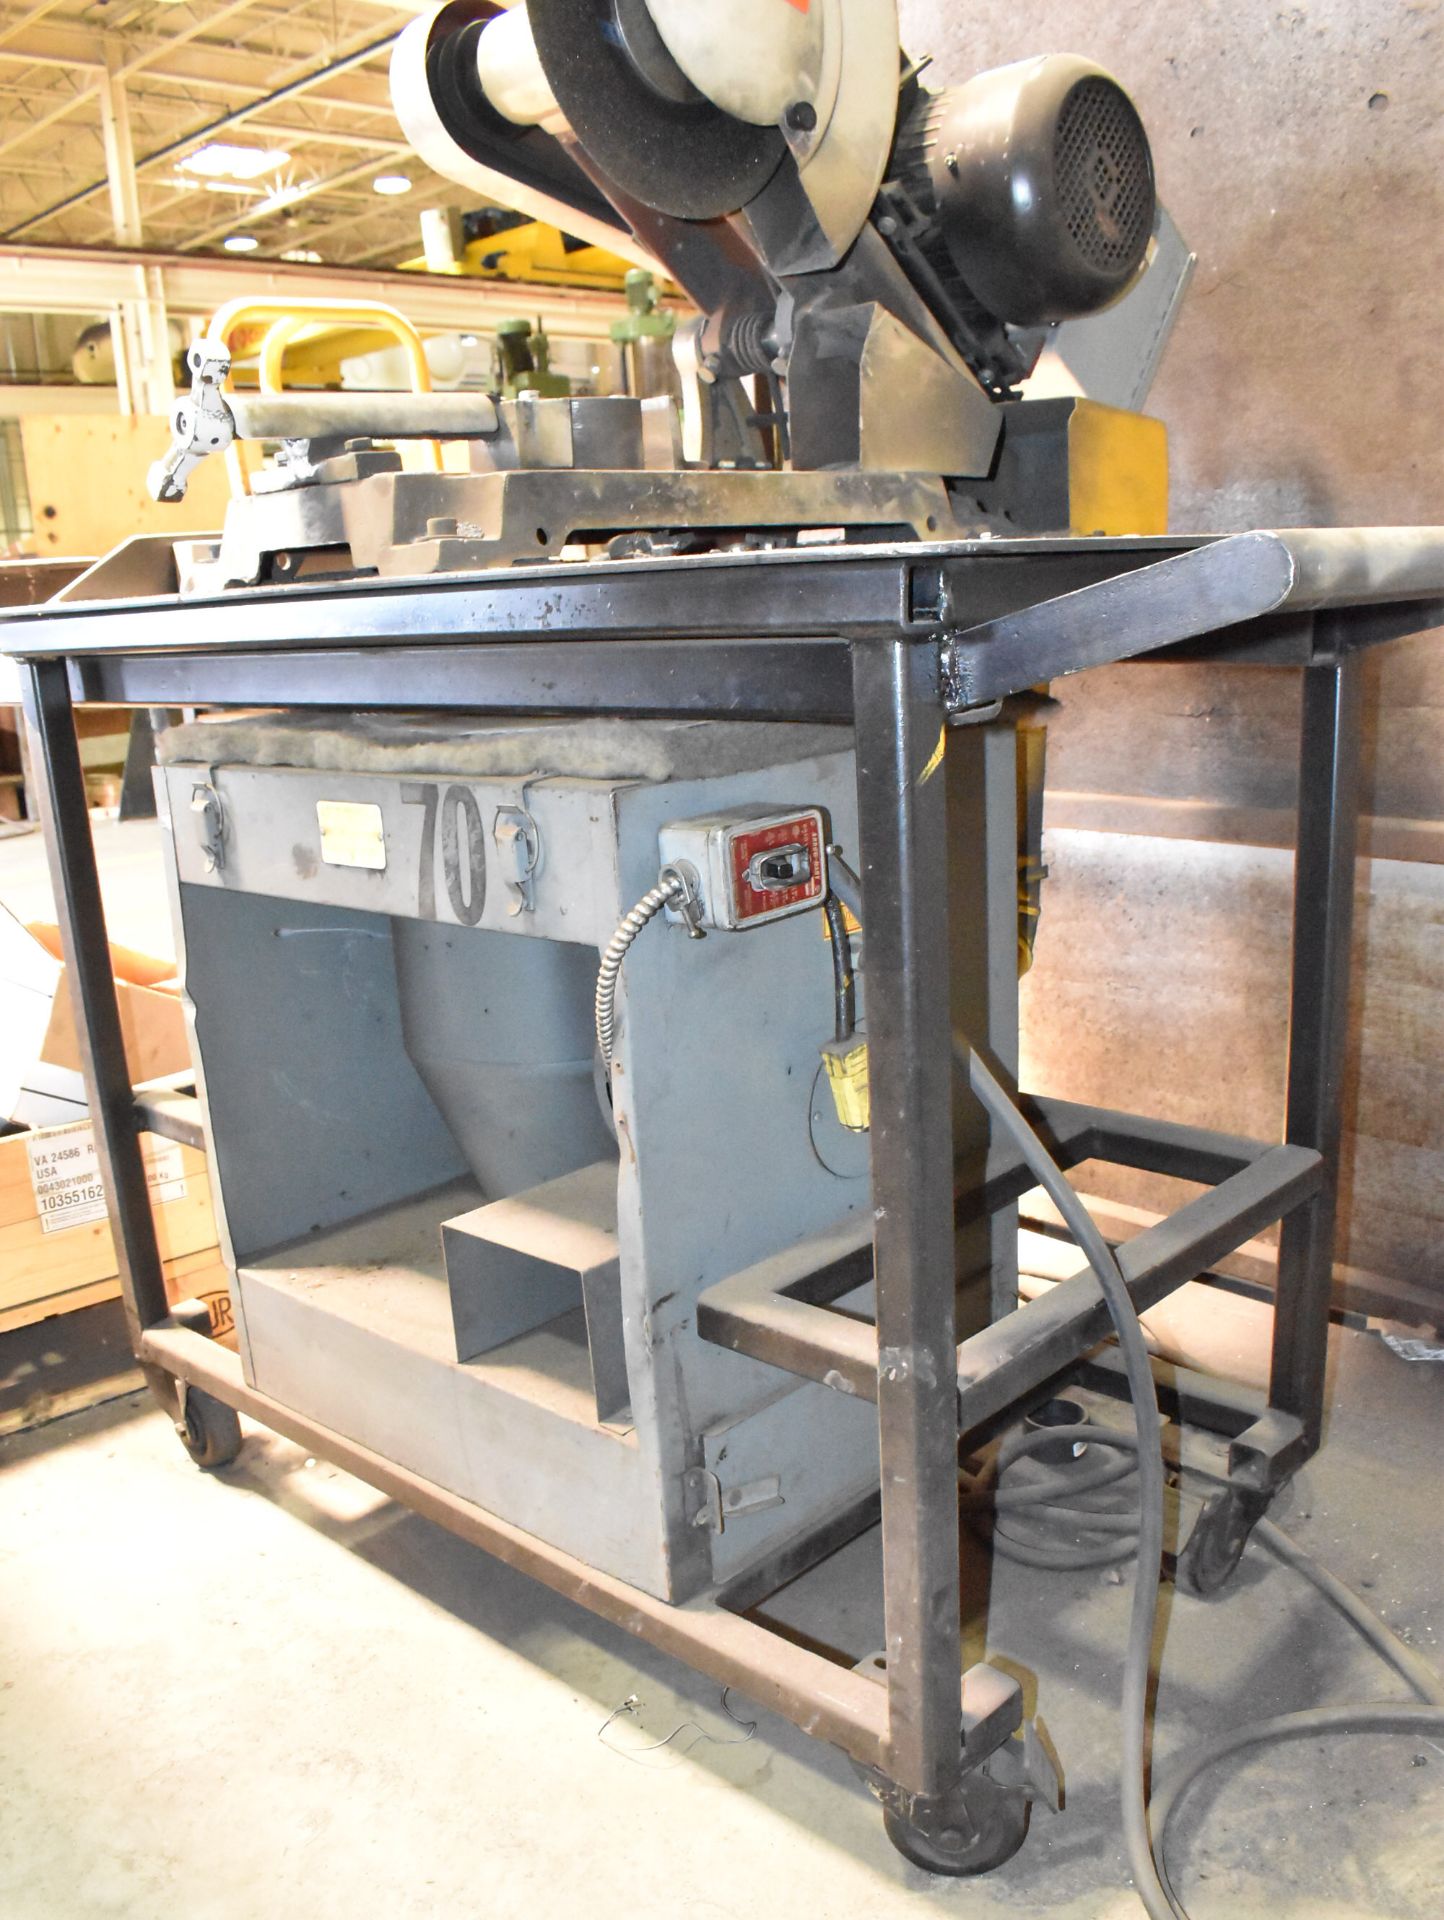 KBC 14" HEAVY DUTY ABRASIVE CUT OFF SAW WITH CART AND DUST COLLECT BOX UNIT, S/N: N/A - Image 6 of 9